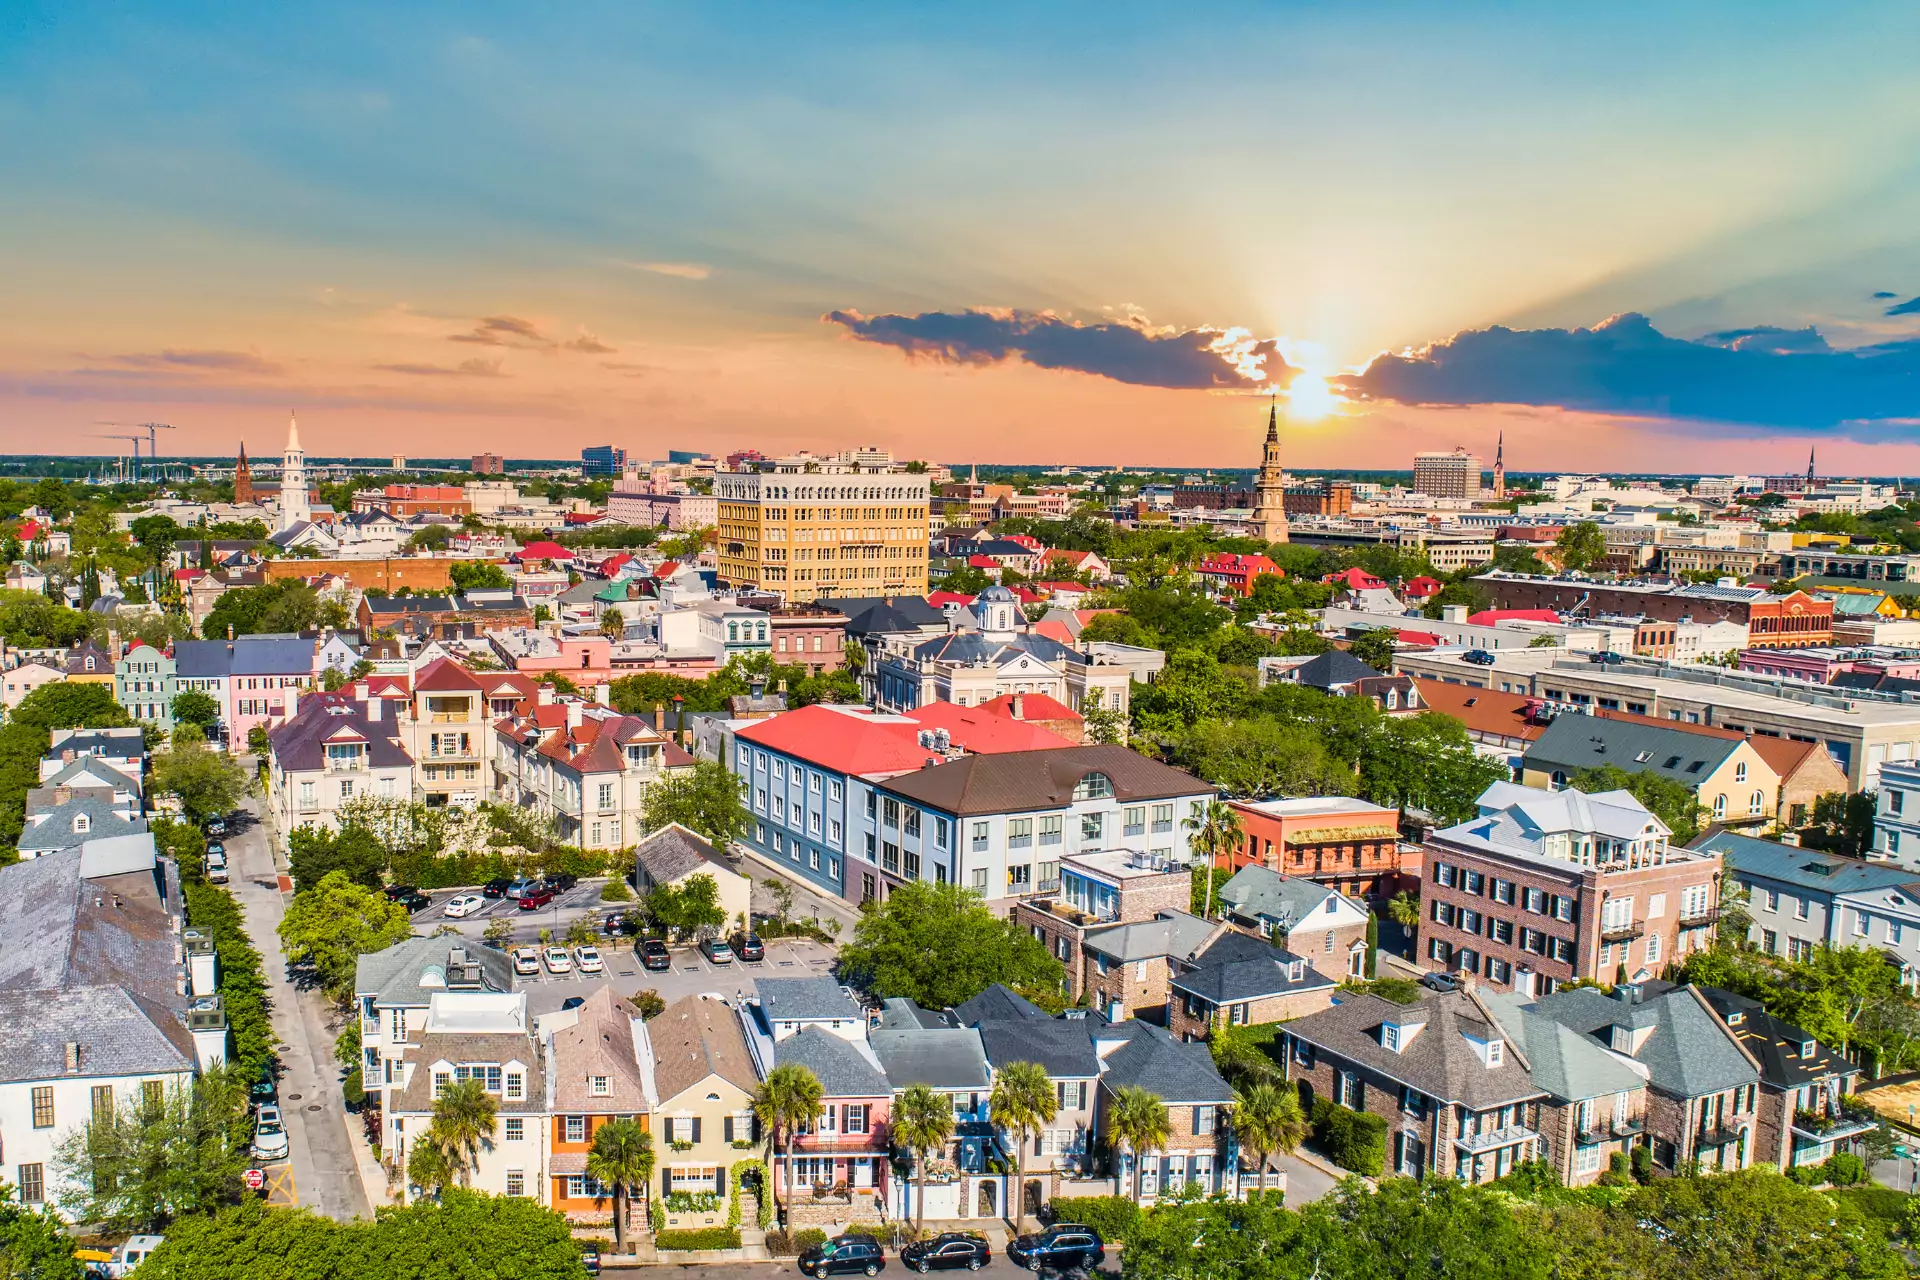 Charleston, South Carolina, is a charming coastal city with rich history, vibrant culture, and stunning architecture.